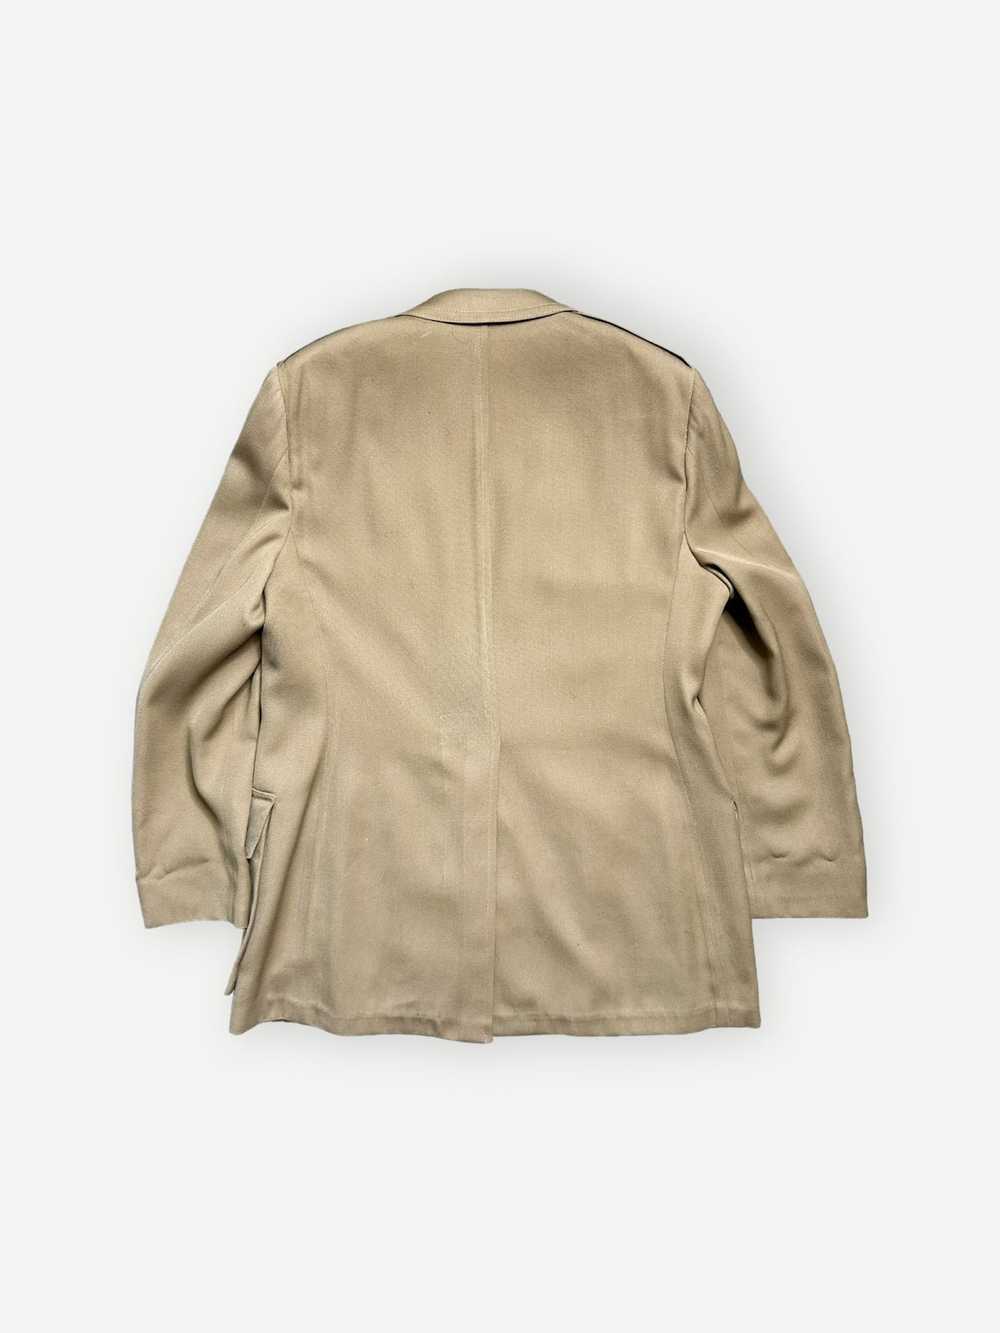 Union Made × Vintage Vintage 50s/60s New Towne Sh… - image 6